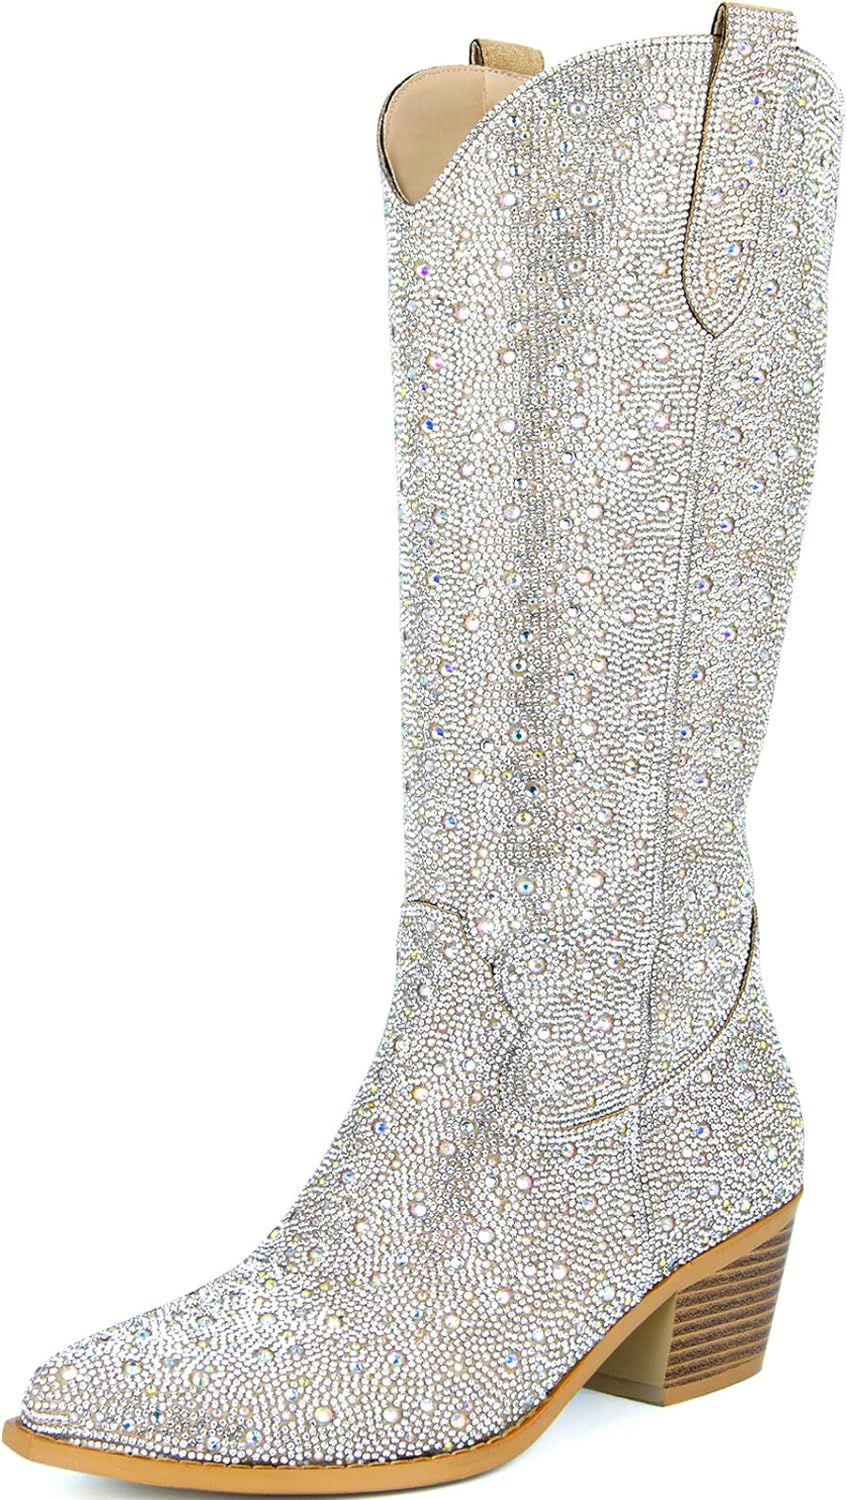 SOVANYOU Women's Rhinestone Cowboy Boots Pointed Toe Block Heel Knee High Boots with Side Zipper | Amazon (US)